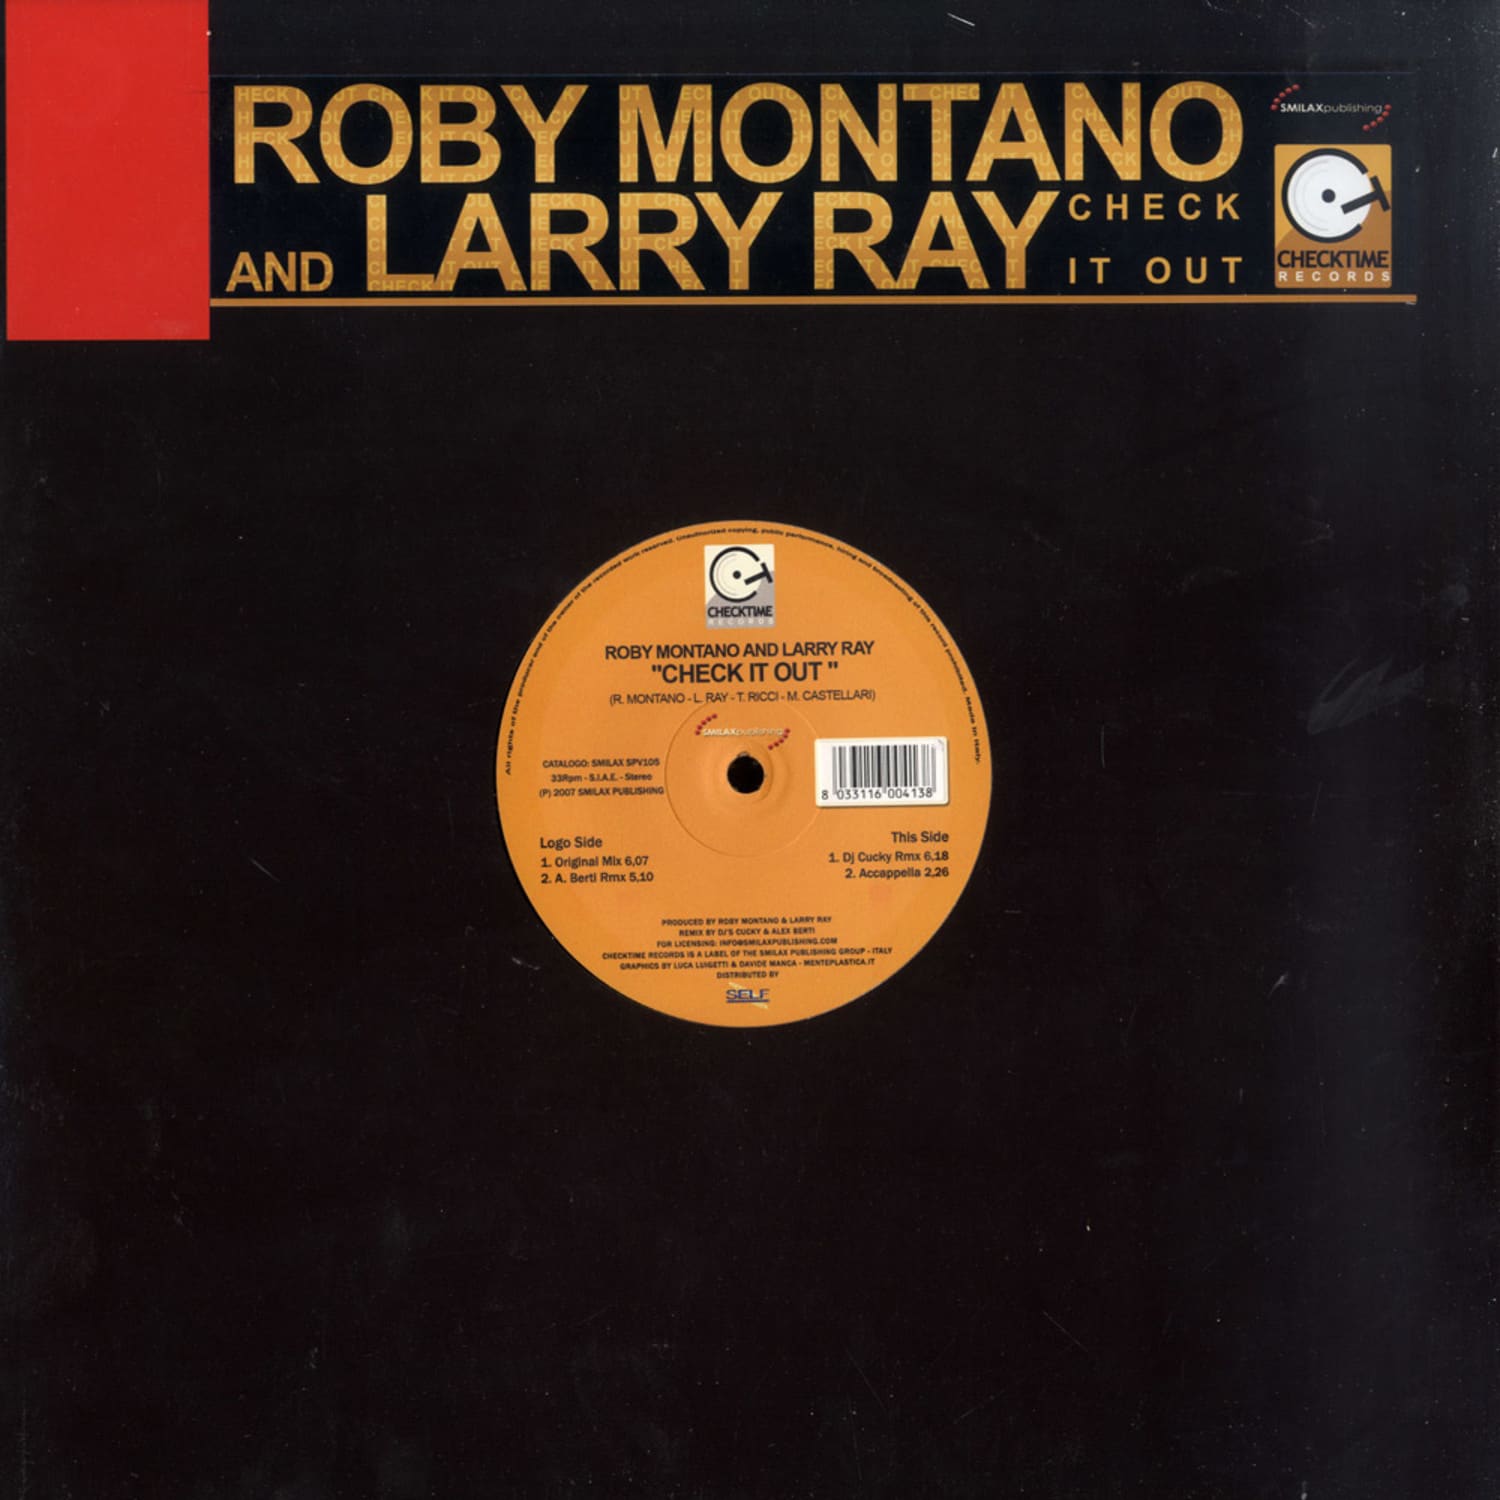 Roby Montano & Larry Ray - CHECK IT OUT